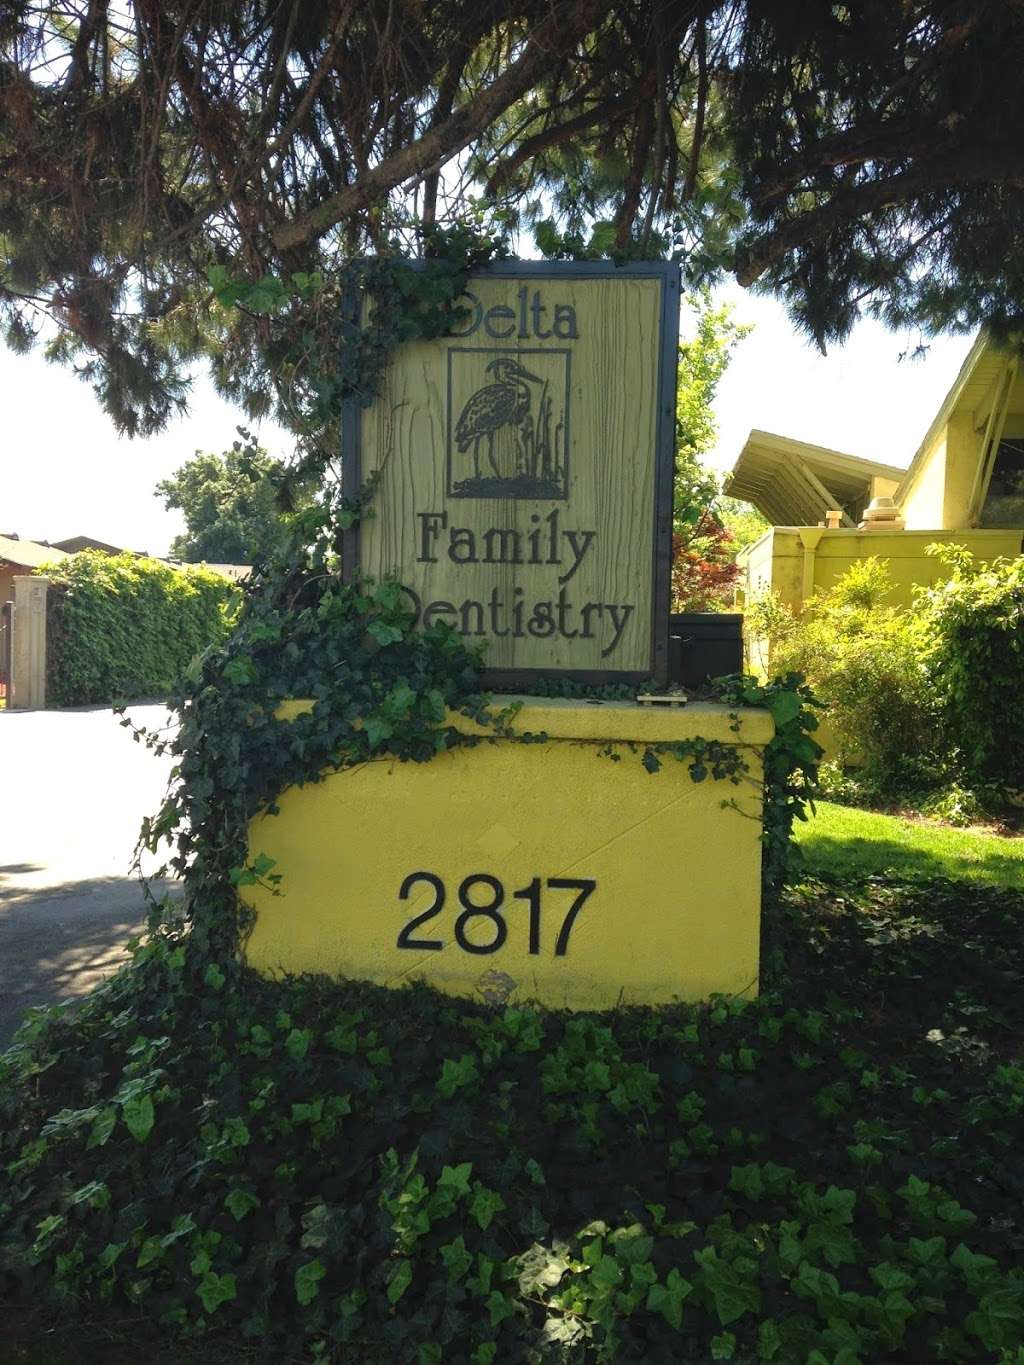 Delta Family Dentistry: Ramona Yousefipour DDS | 2817 Main St, Oakley, CA 94561, USA | Phone: (925) 625-2616